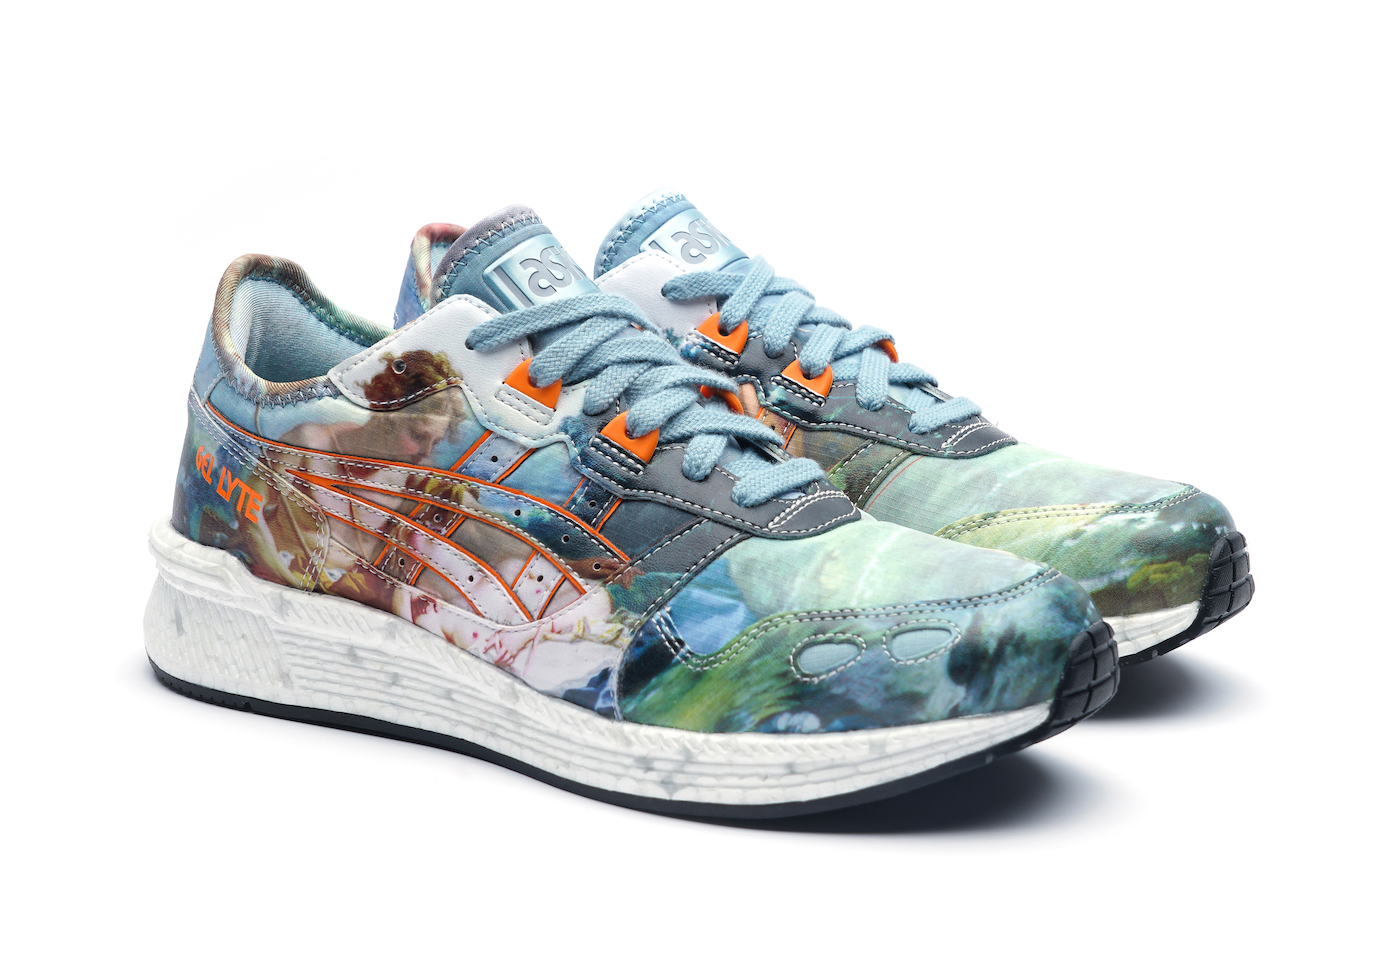 ASICS & Vivienne Westwood Release Limited Edition Collaboration